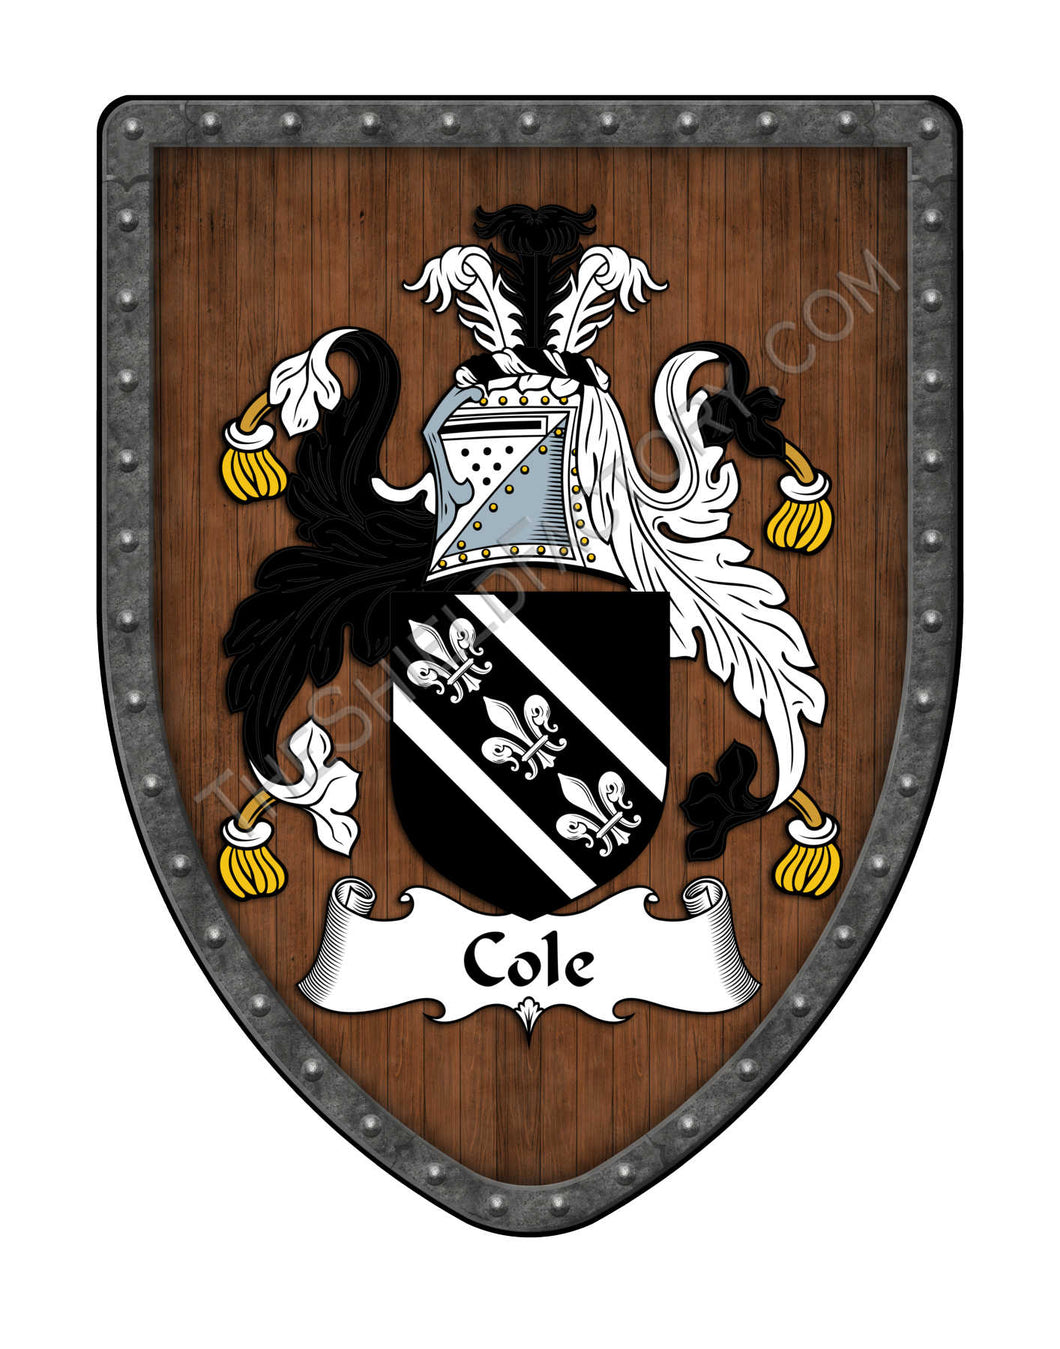 Cole Coat of Arms Shield Family Crest